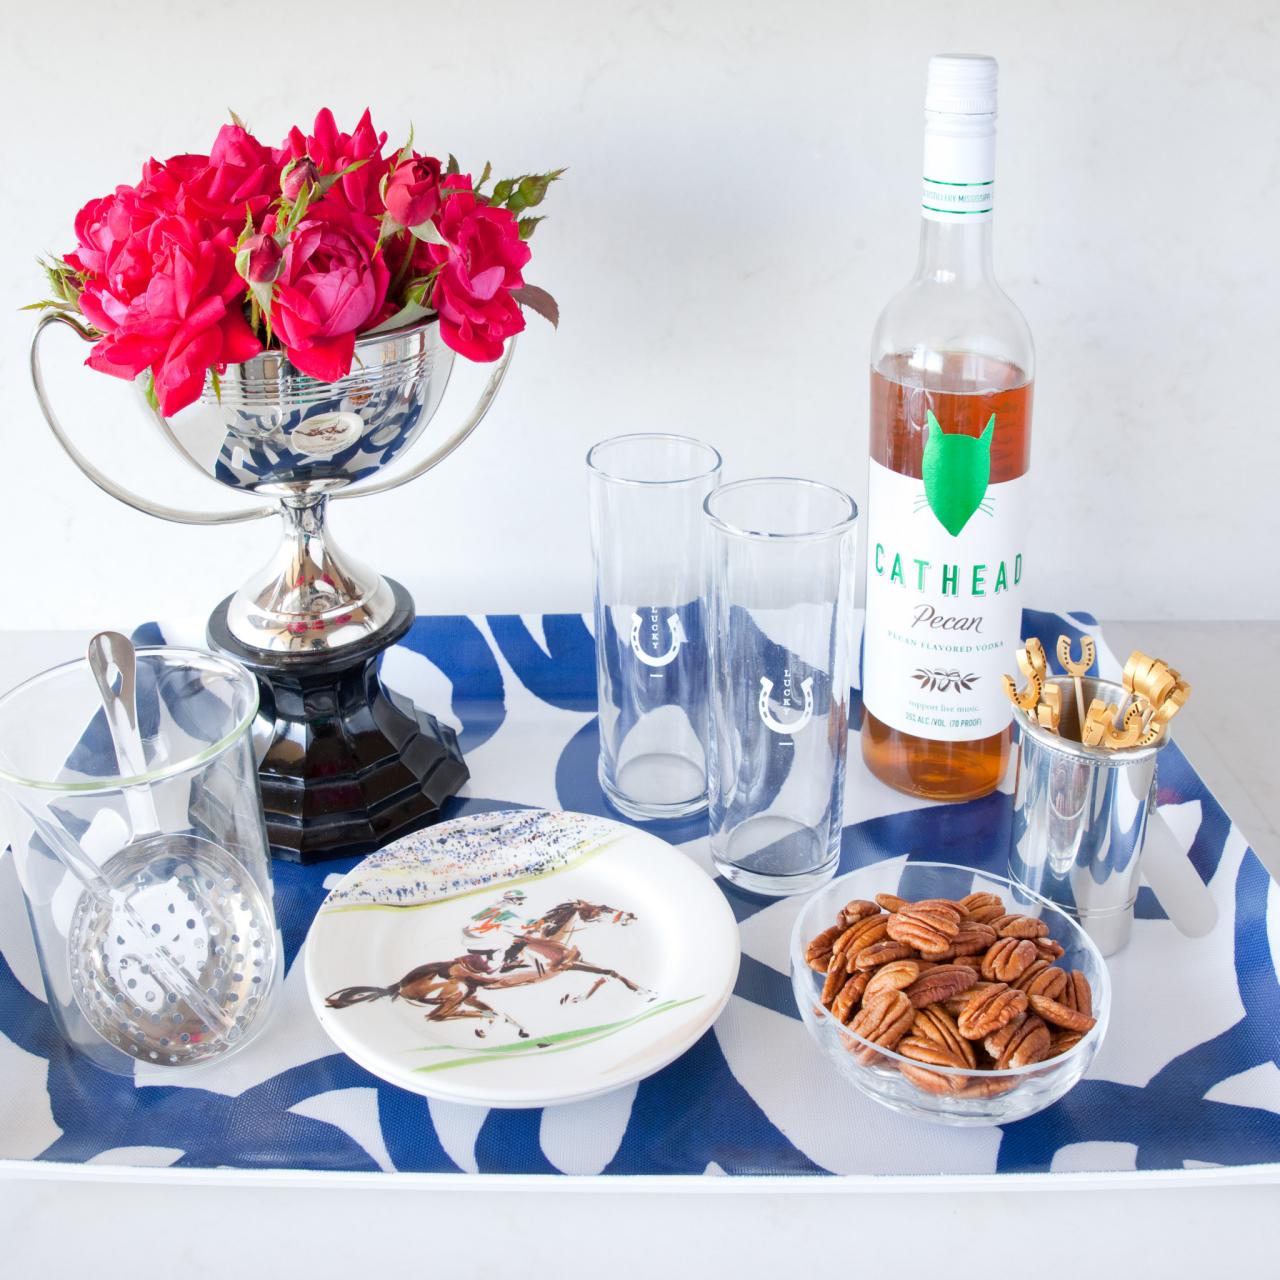 10 chic ways to style a serving tray